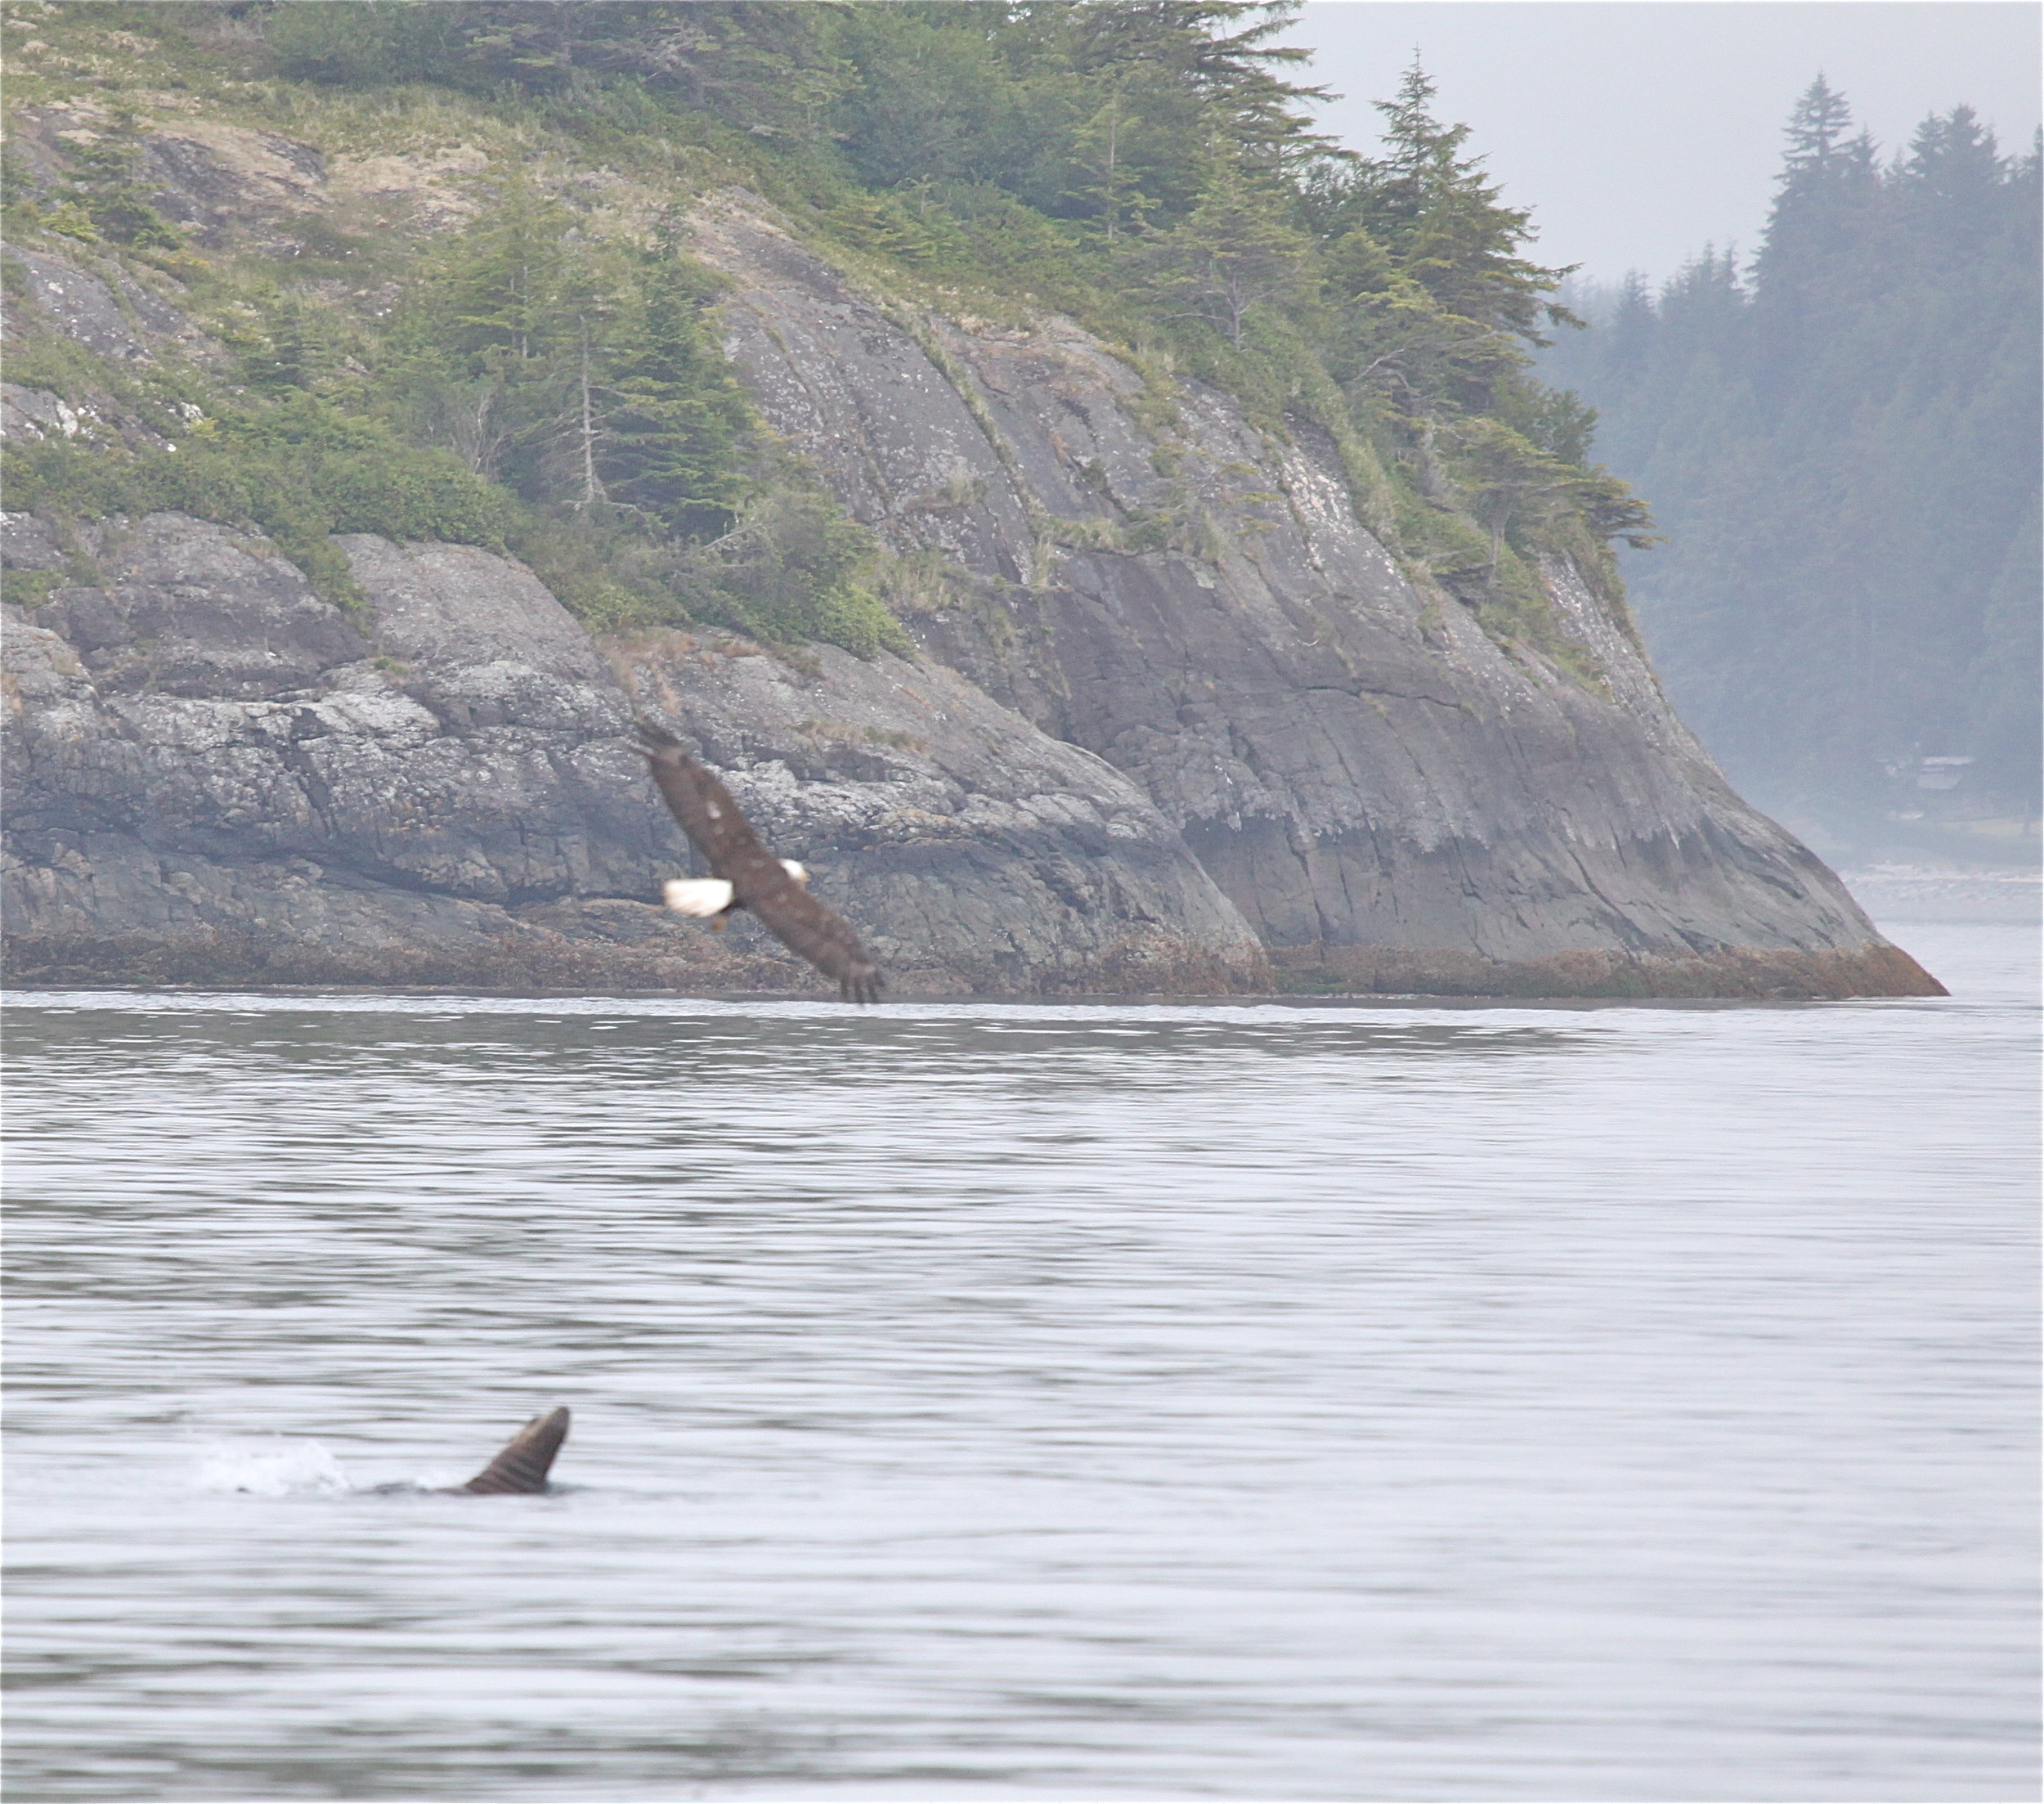 Stellar Sea Lion with Bald Eagle grabbing a portion of the salmon